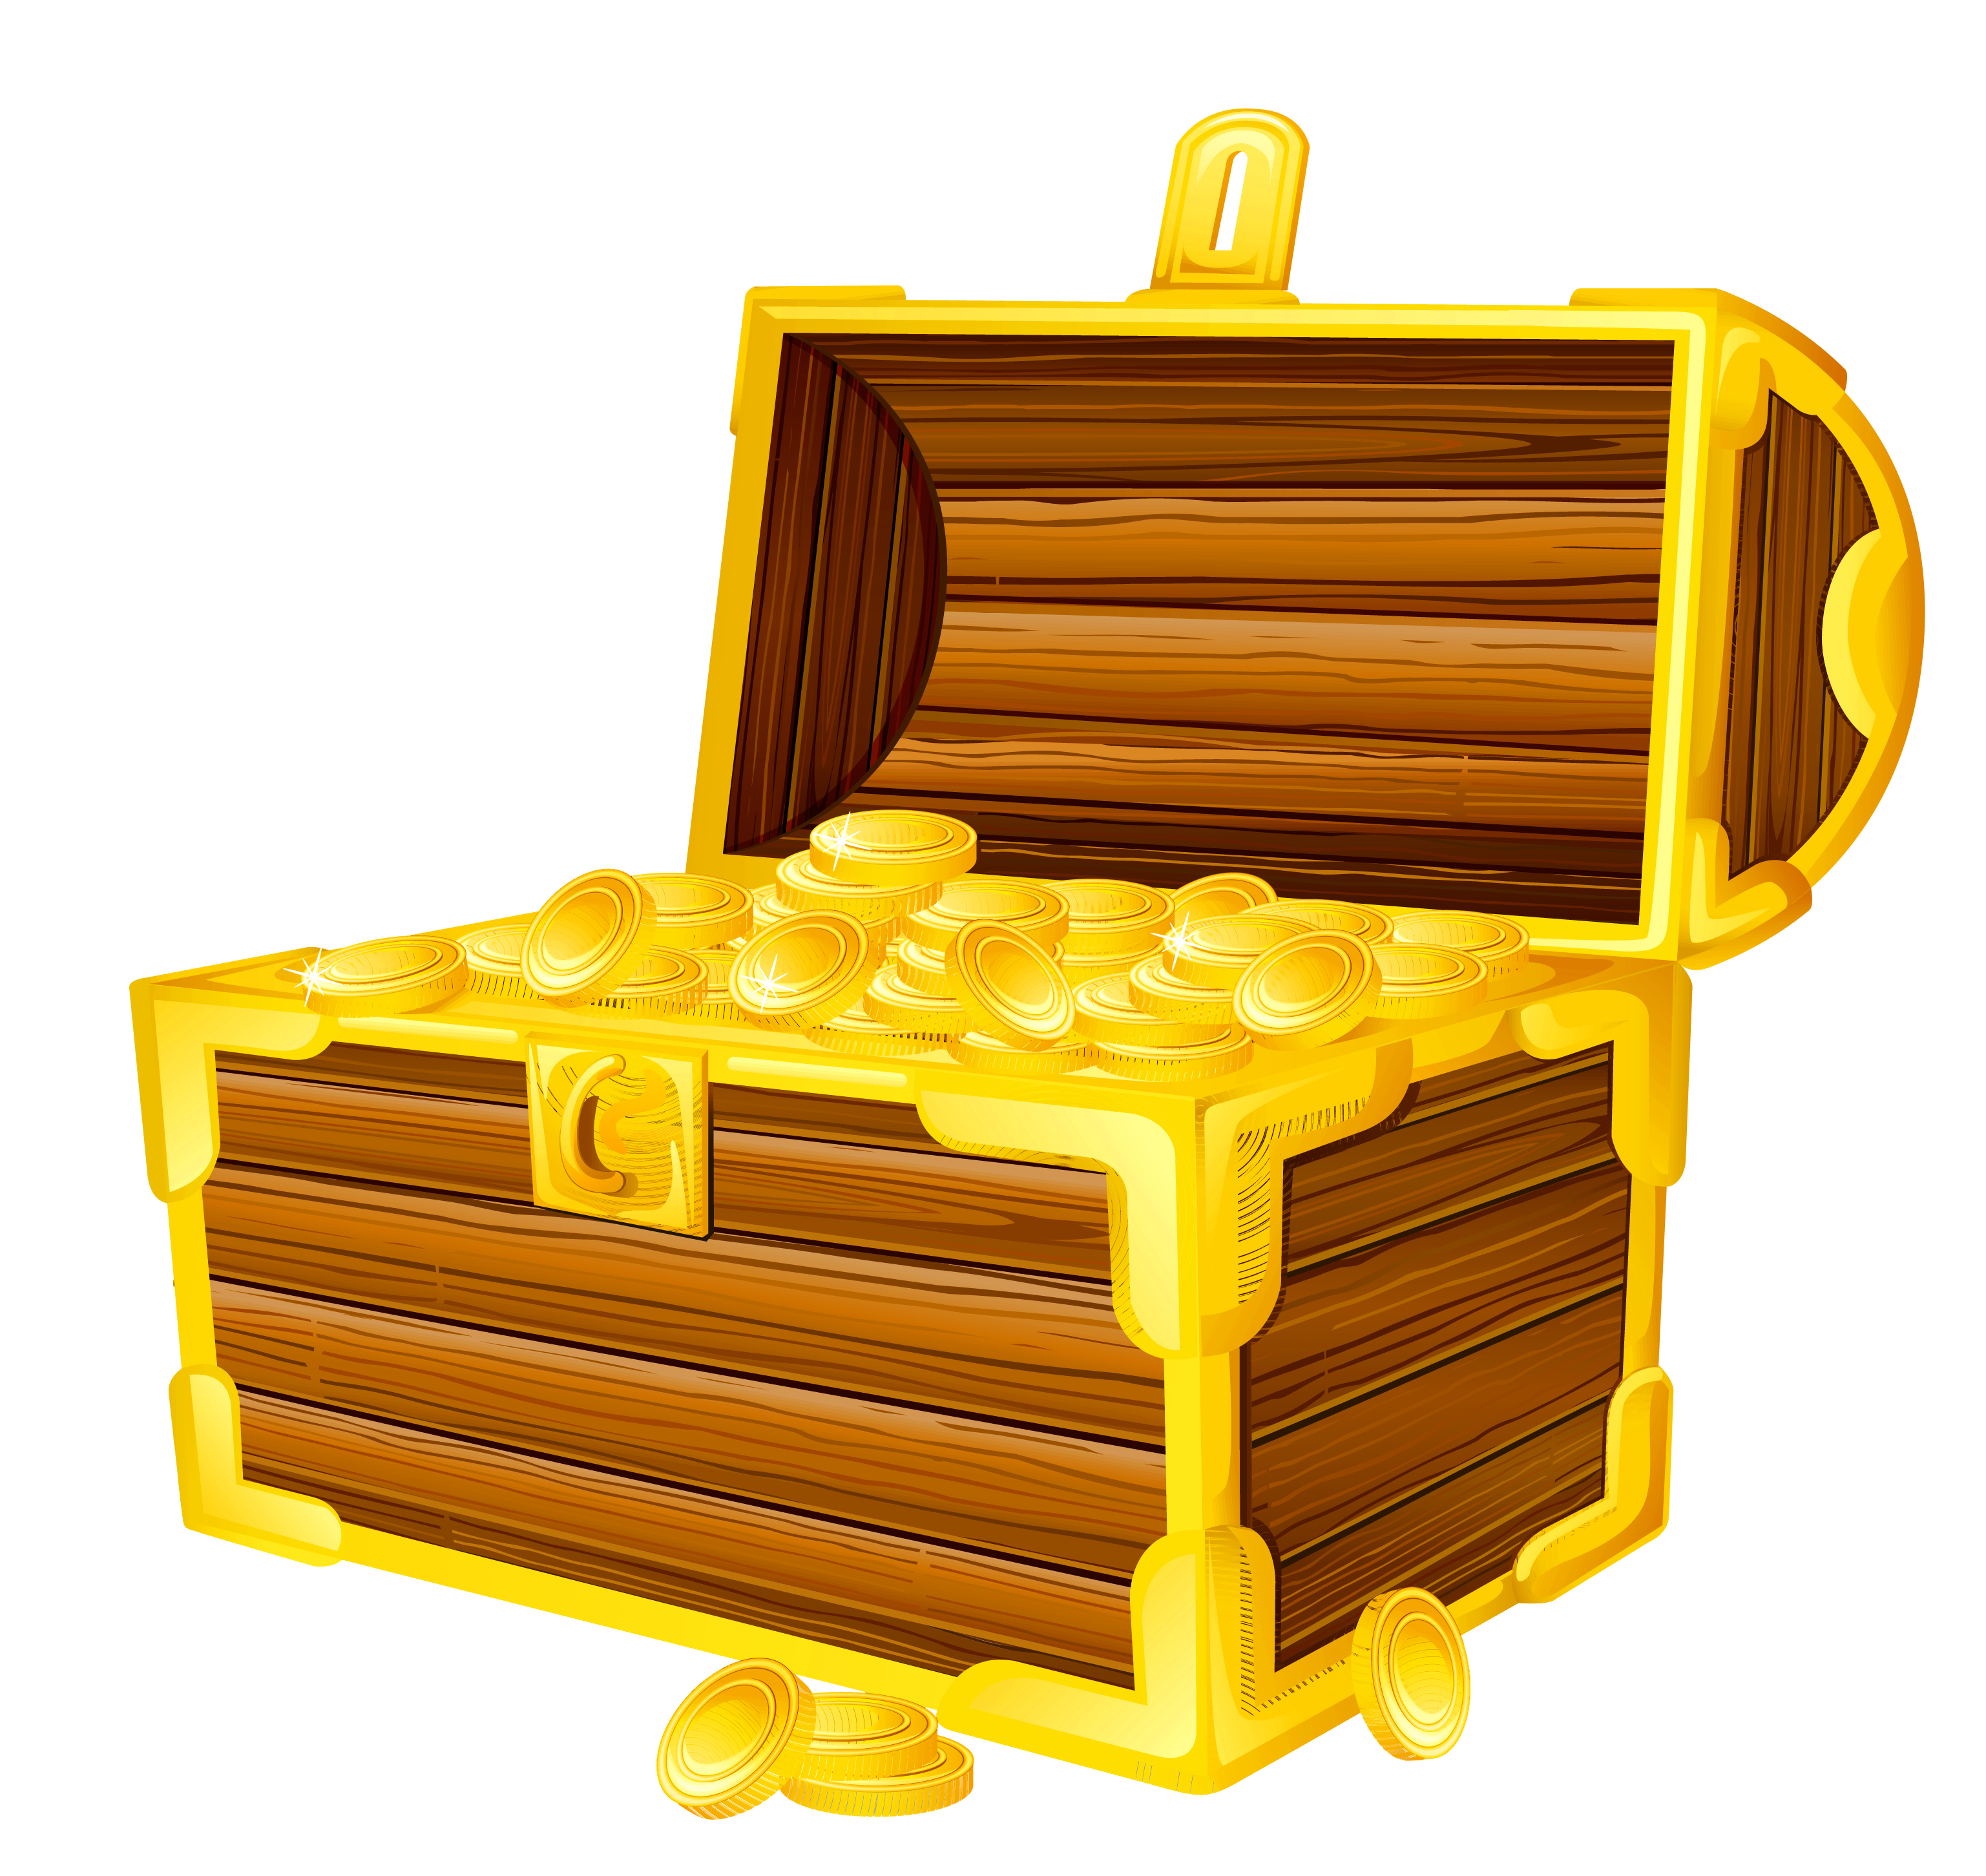 Pirate Treasure Chest Png Hd - Treasure Chest Picture Cliparts, Transparent background PNG HD thumbnail